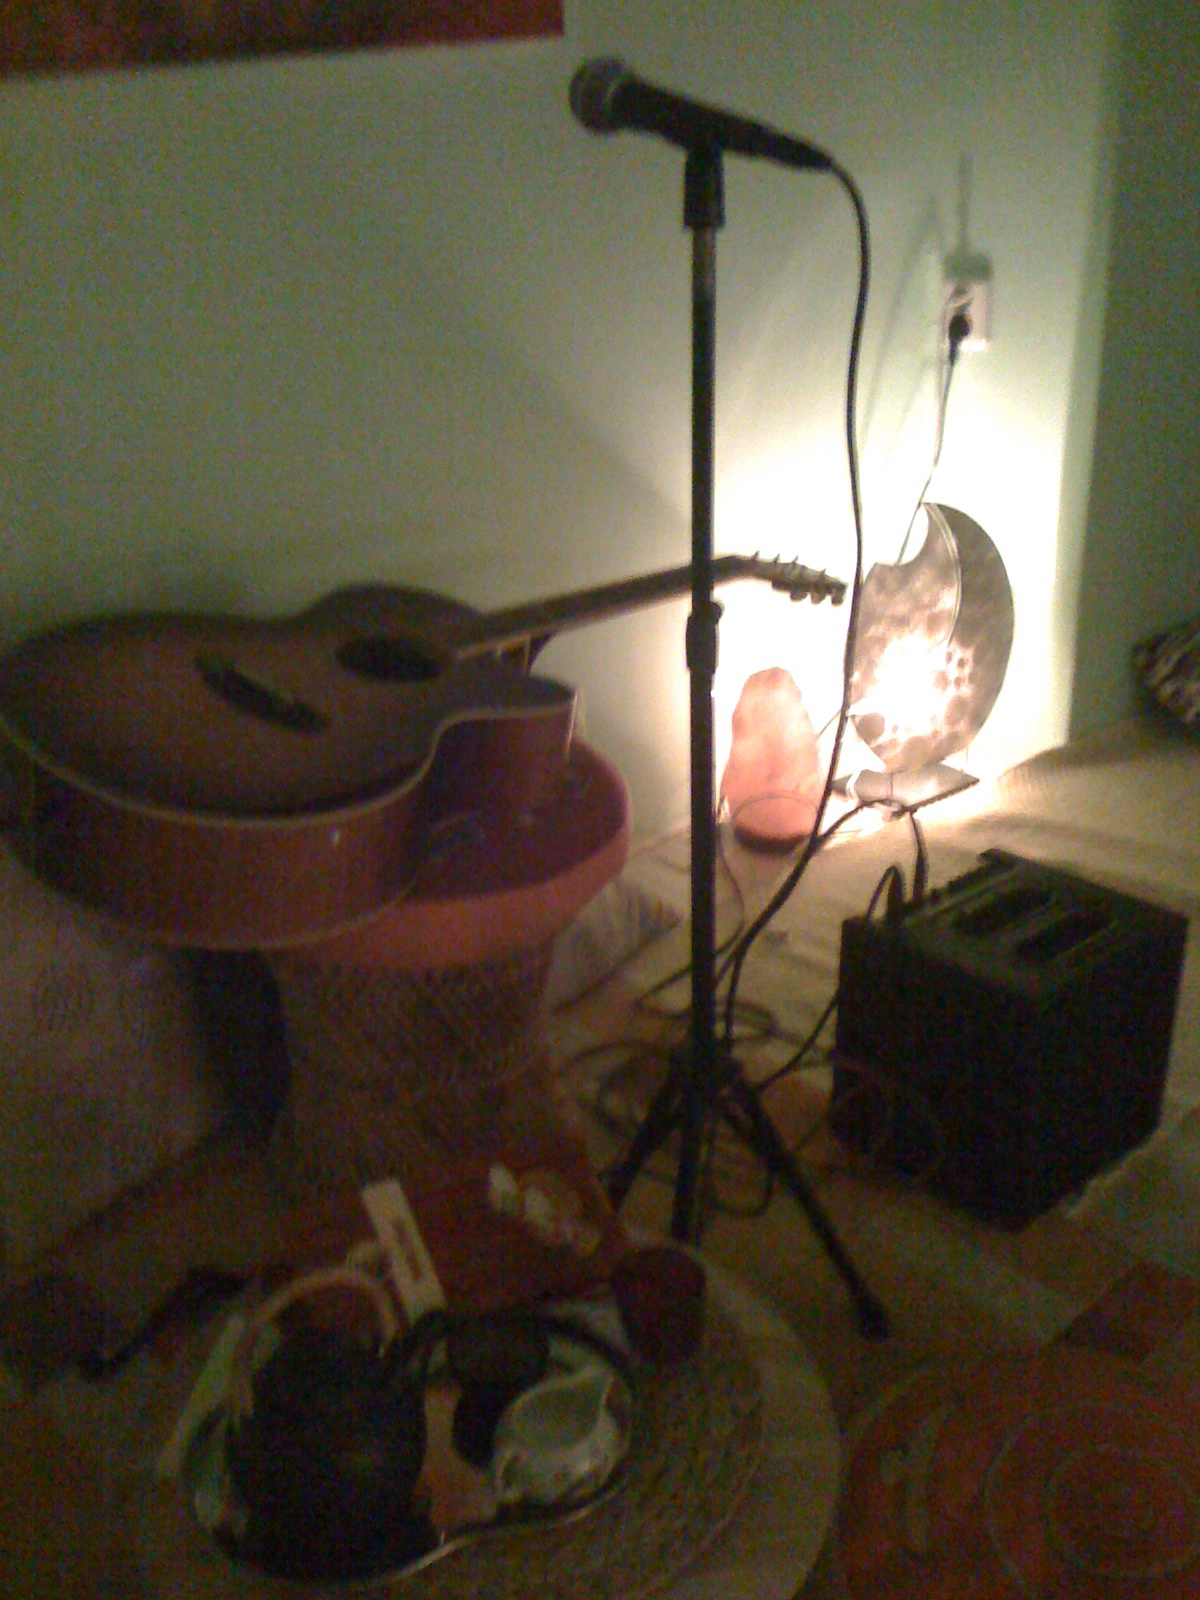 guitar, drums and guitar string on a table